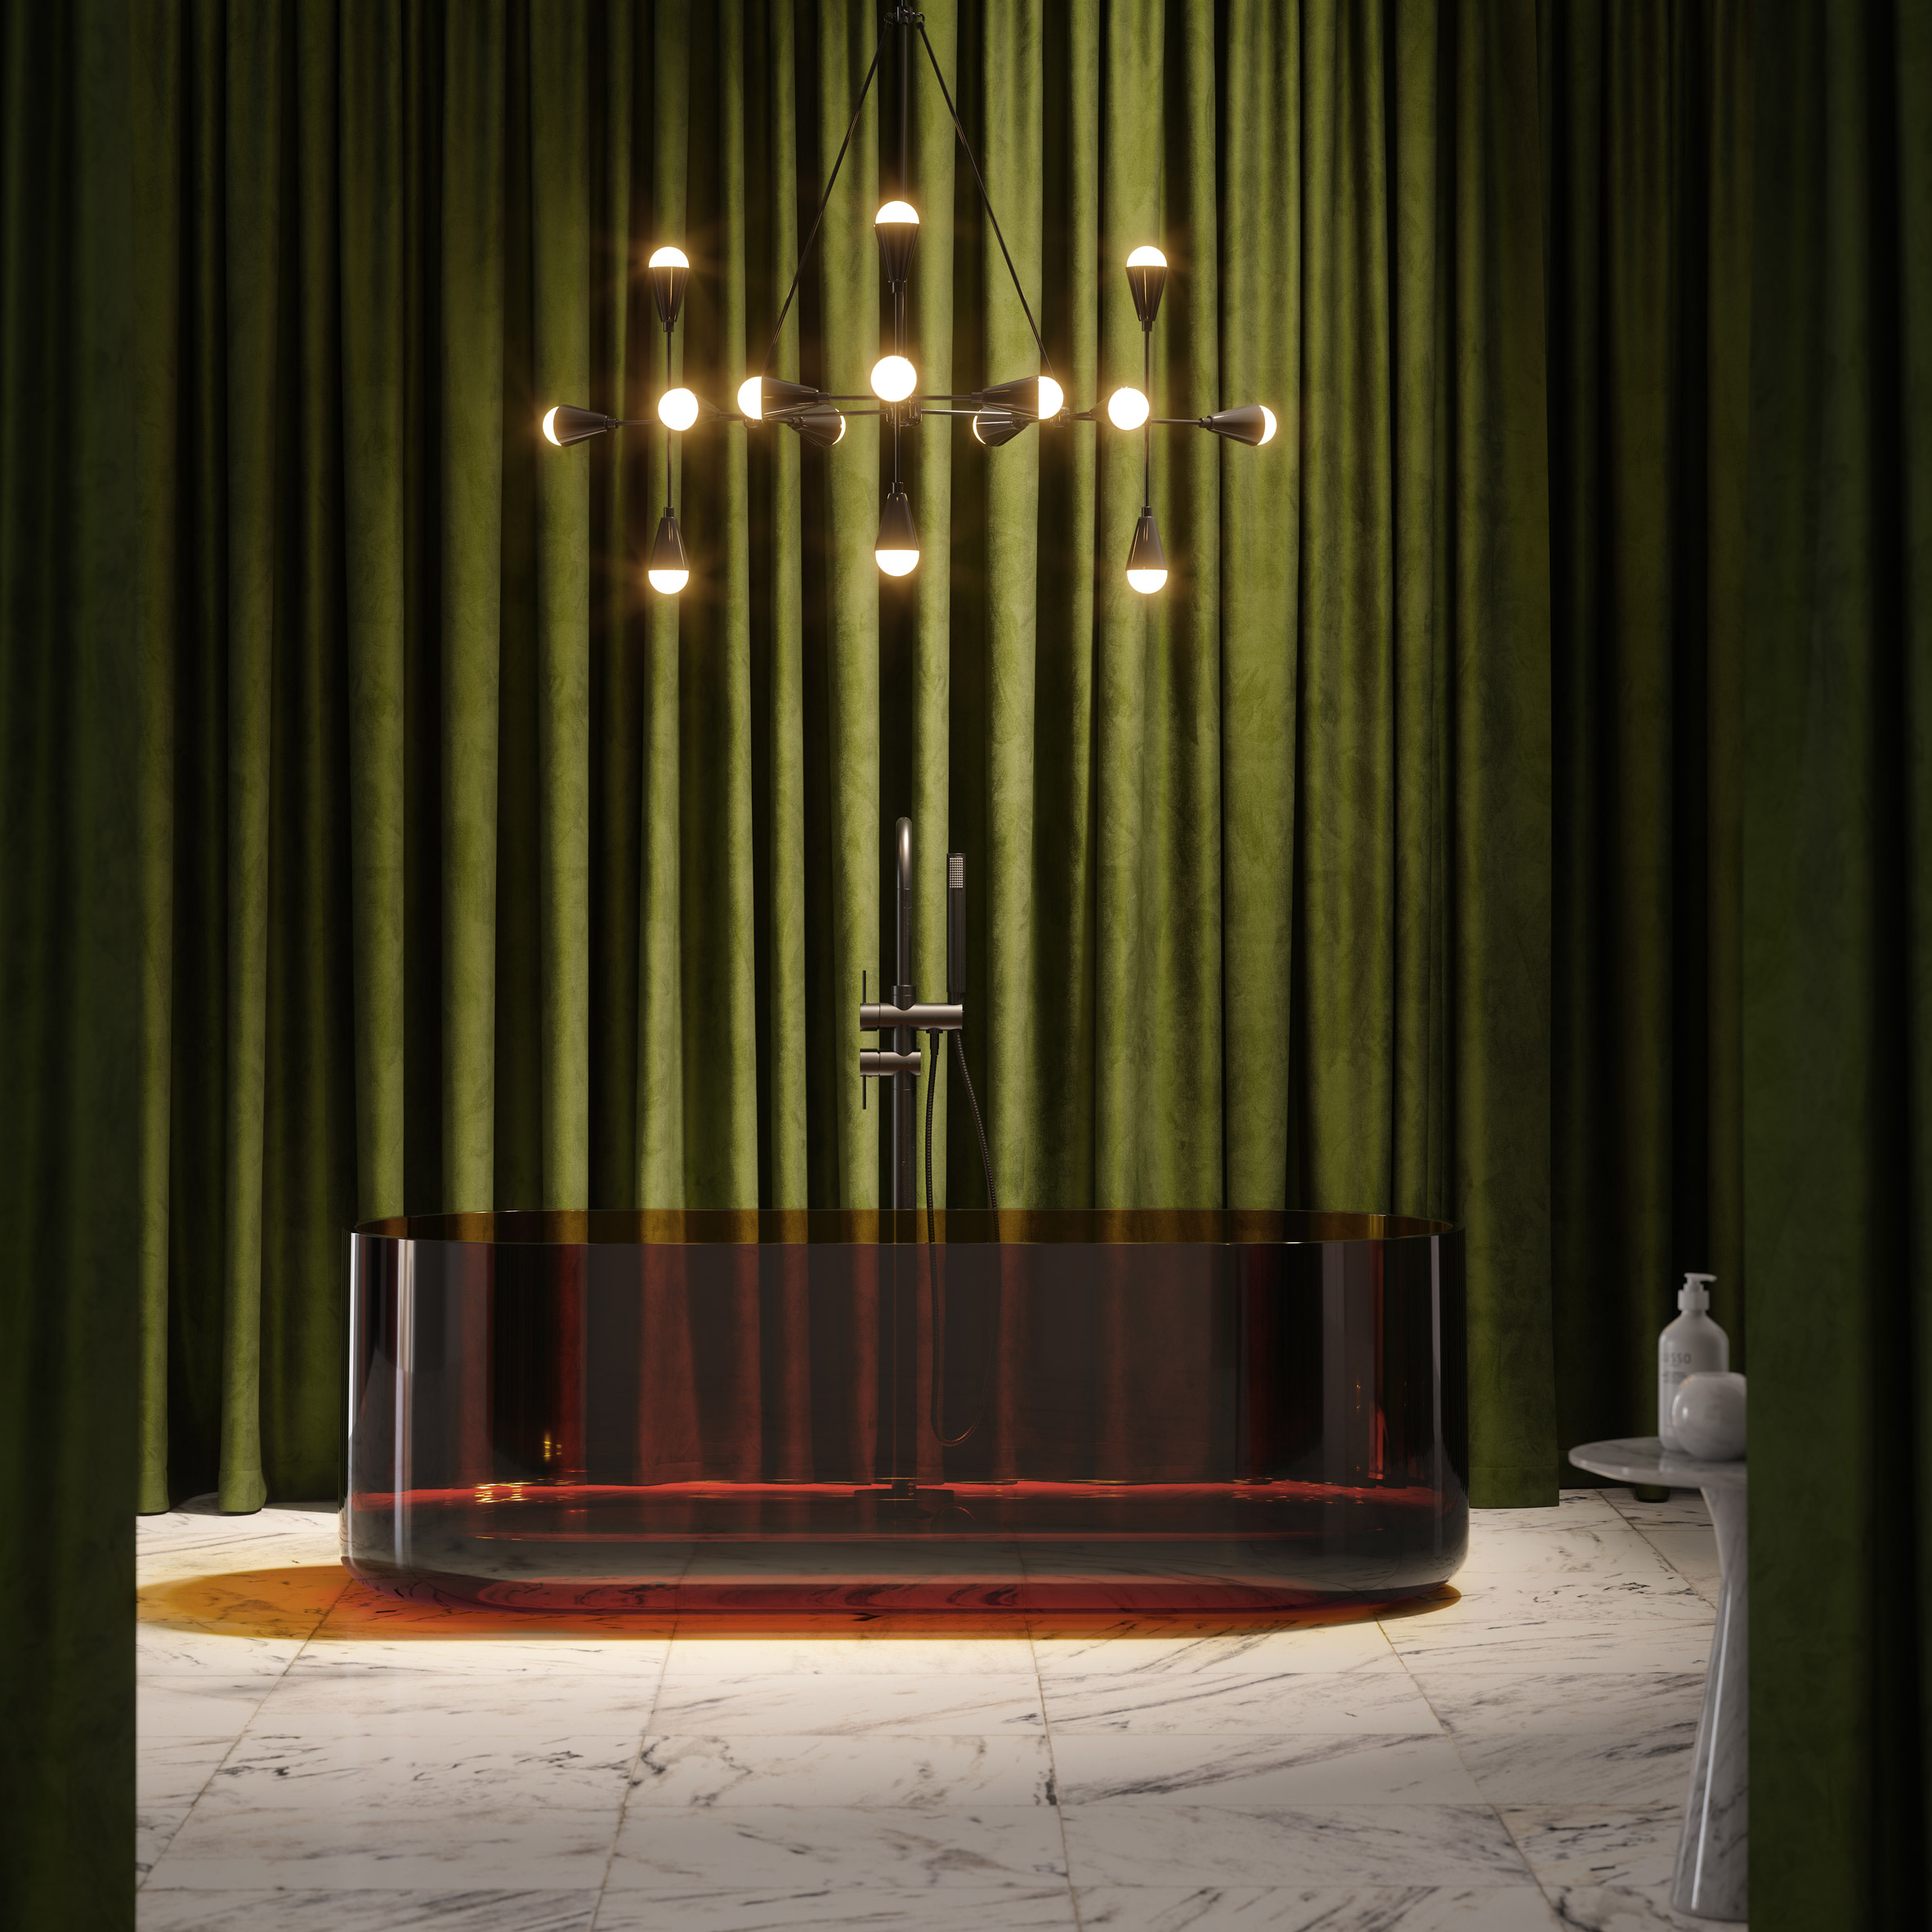 Amore translucent resin bath by Lusso